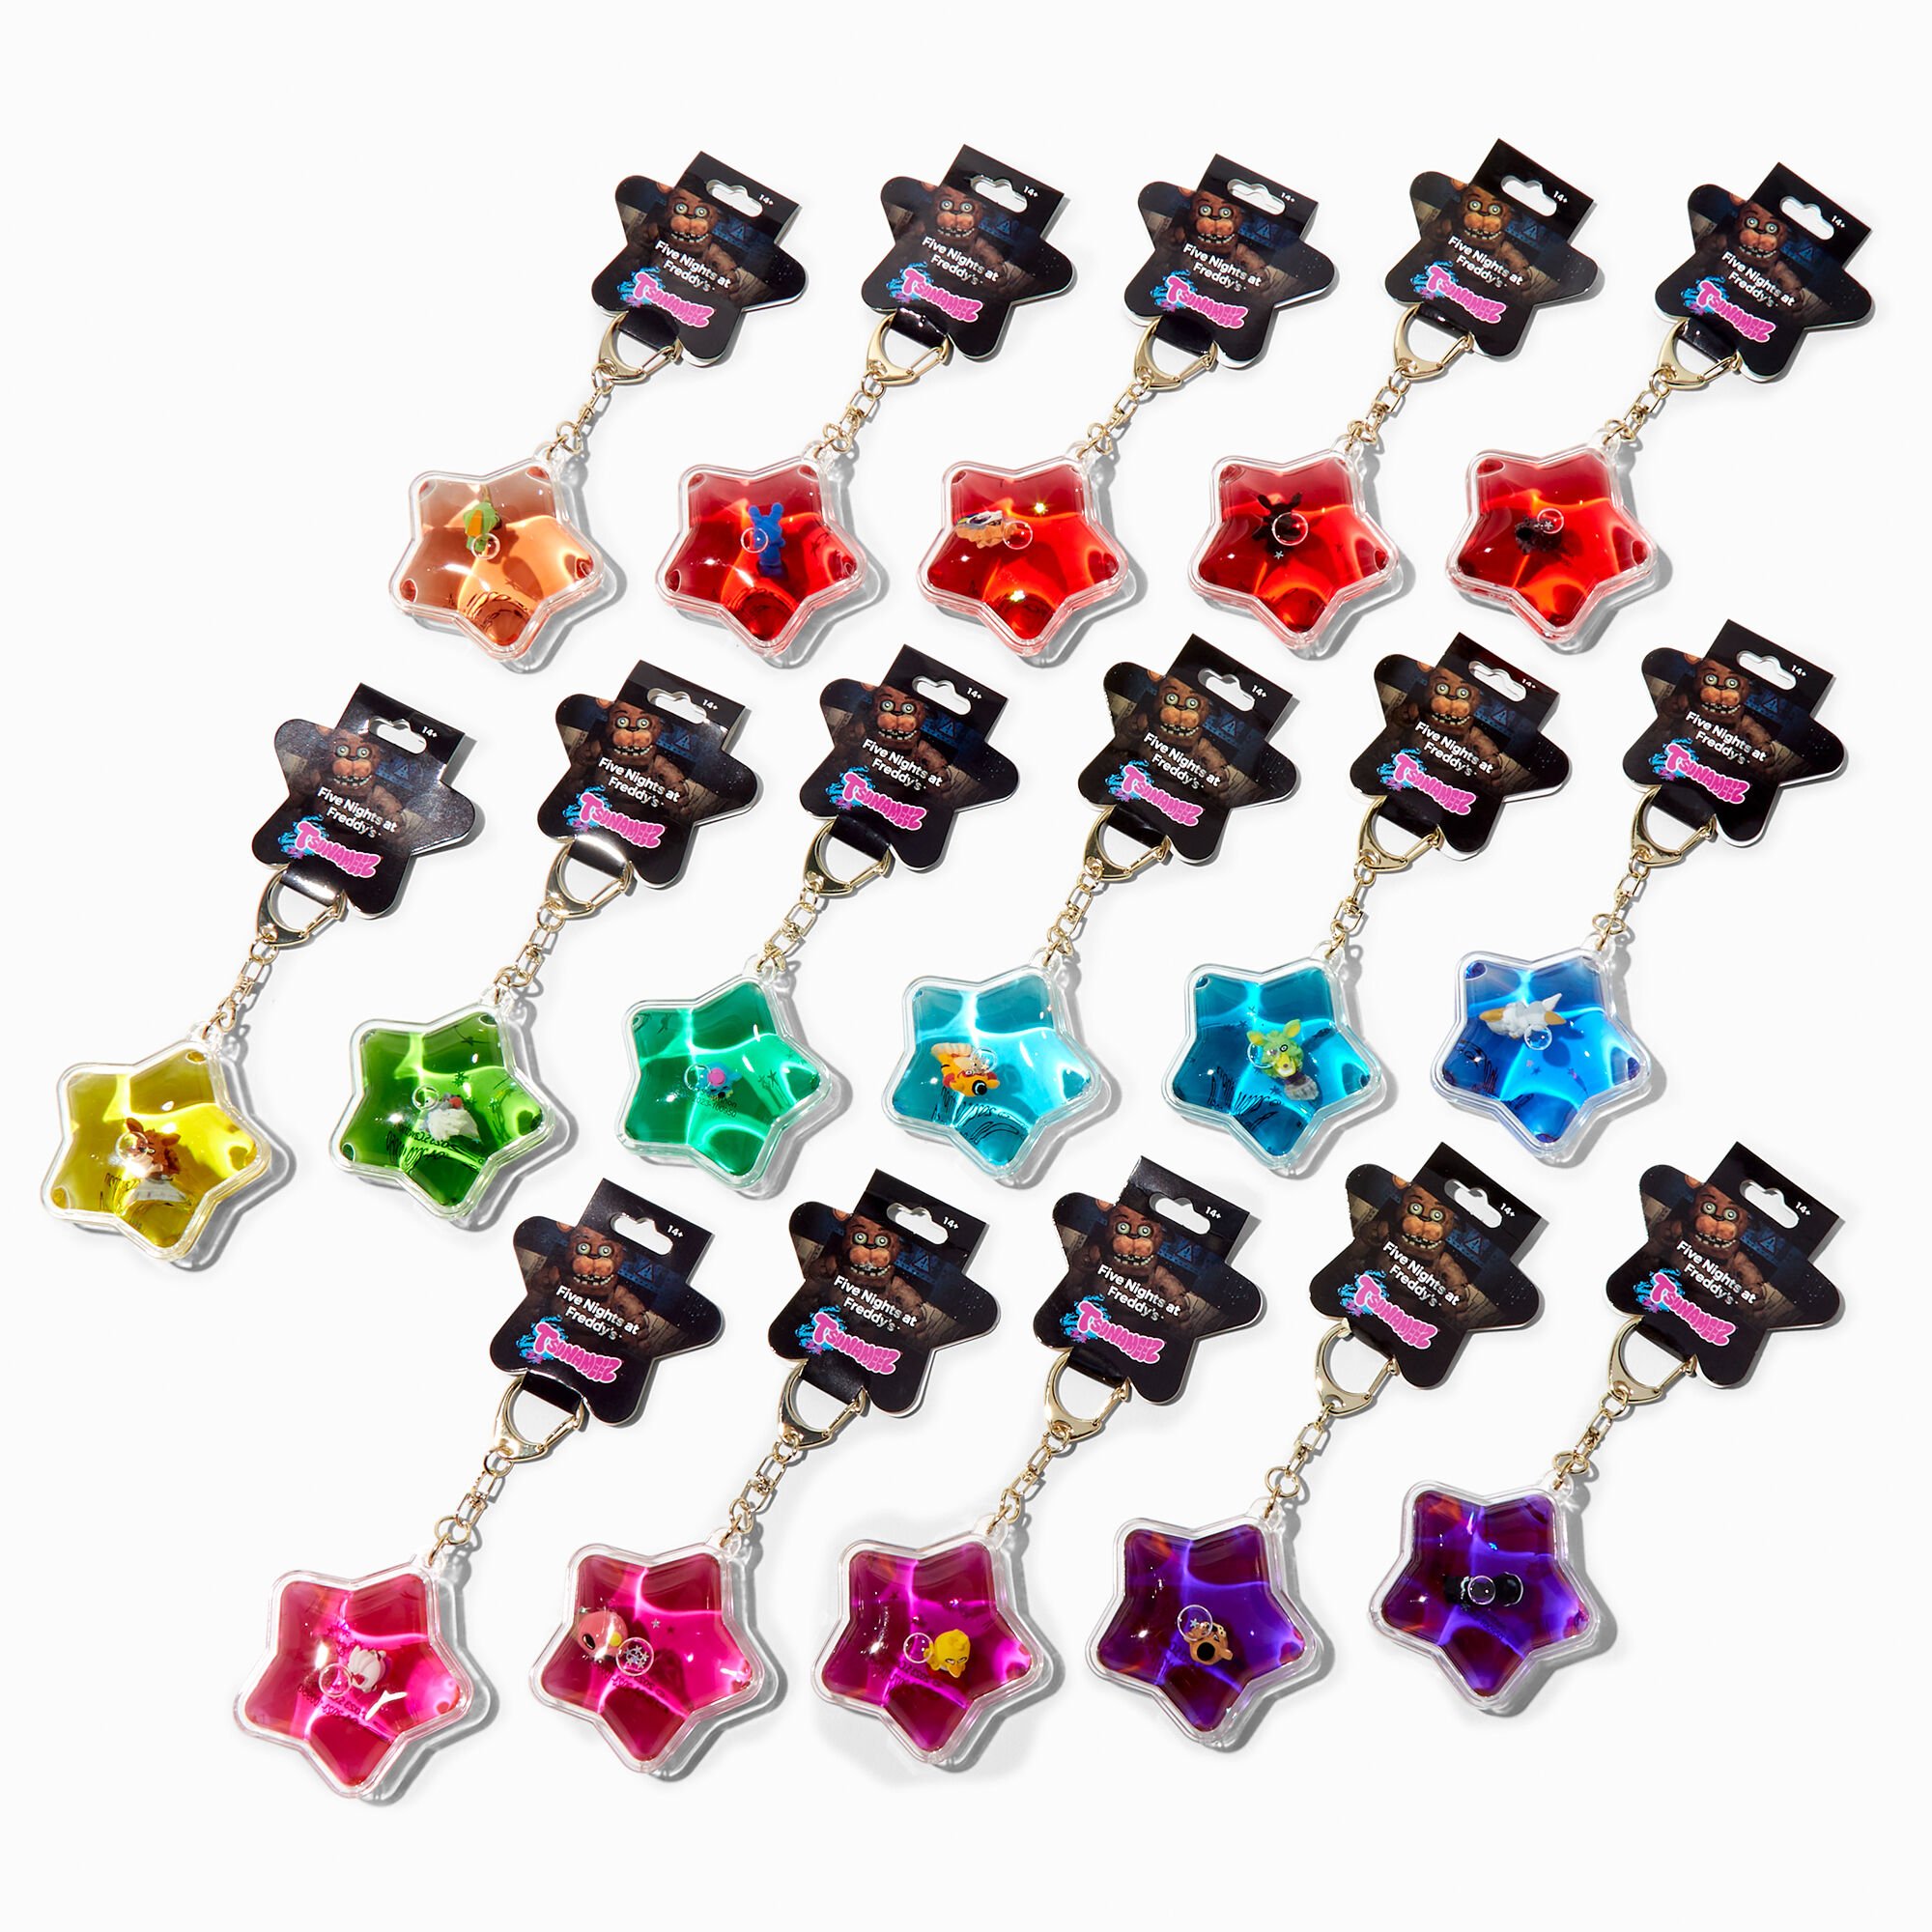 Claire's Five Nights at Freddy's Tsunameez Keychain Blind Bag - Styles May Vary